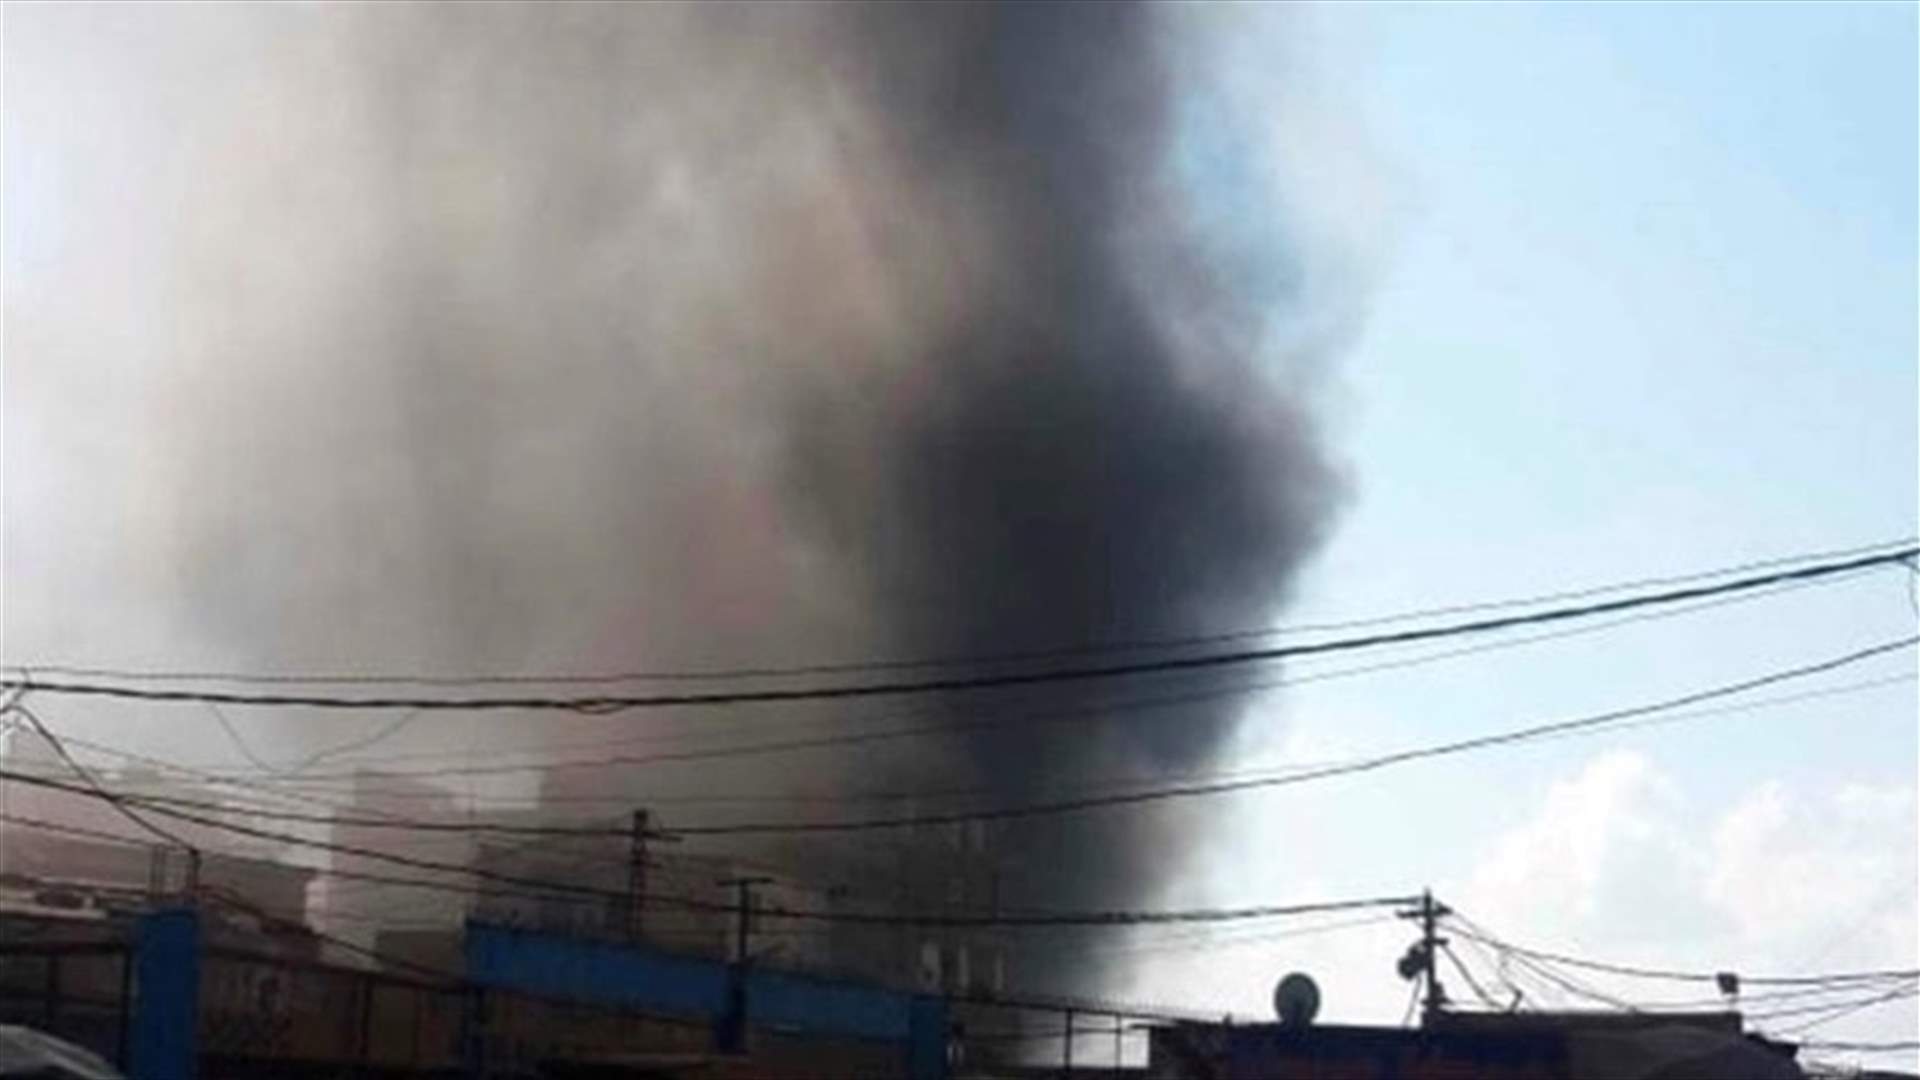 Fire erupts in a paint factory in Ouzai-[VIDEO]